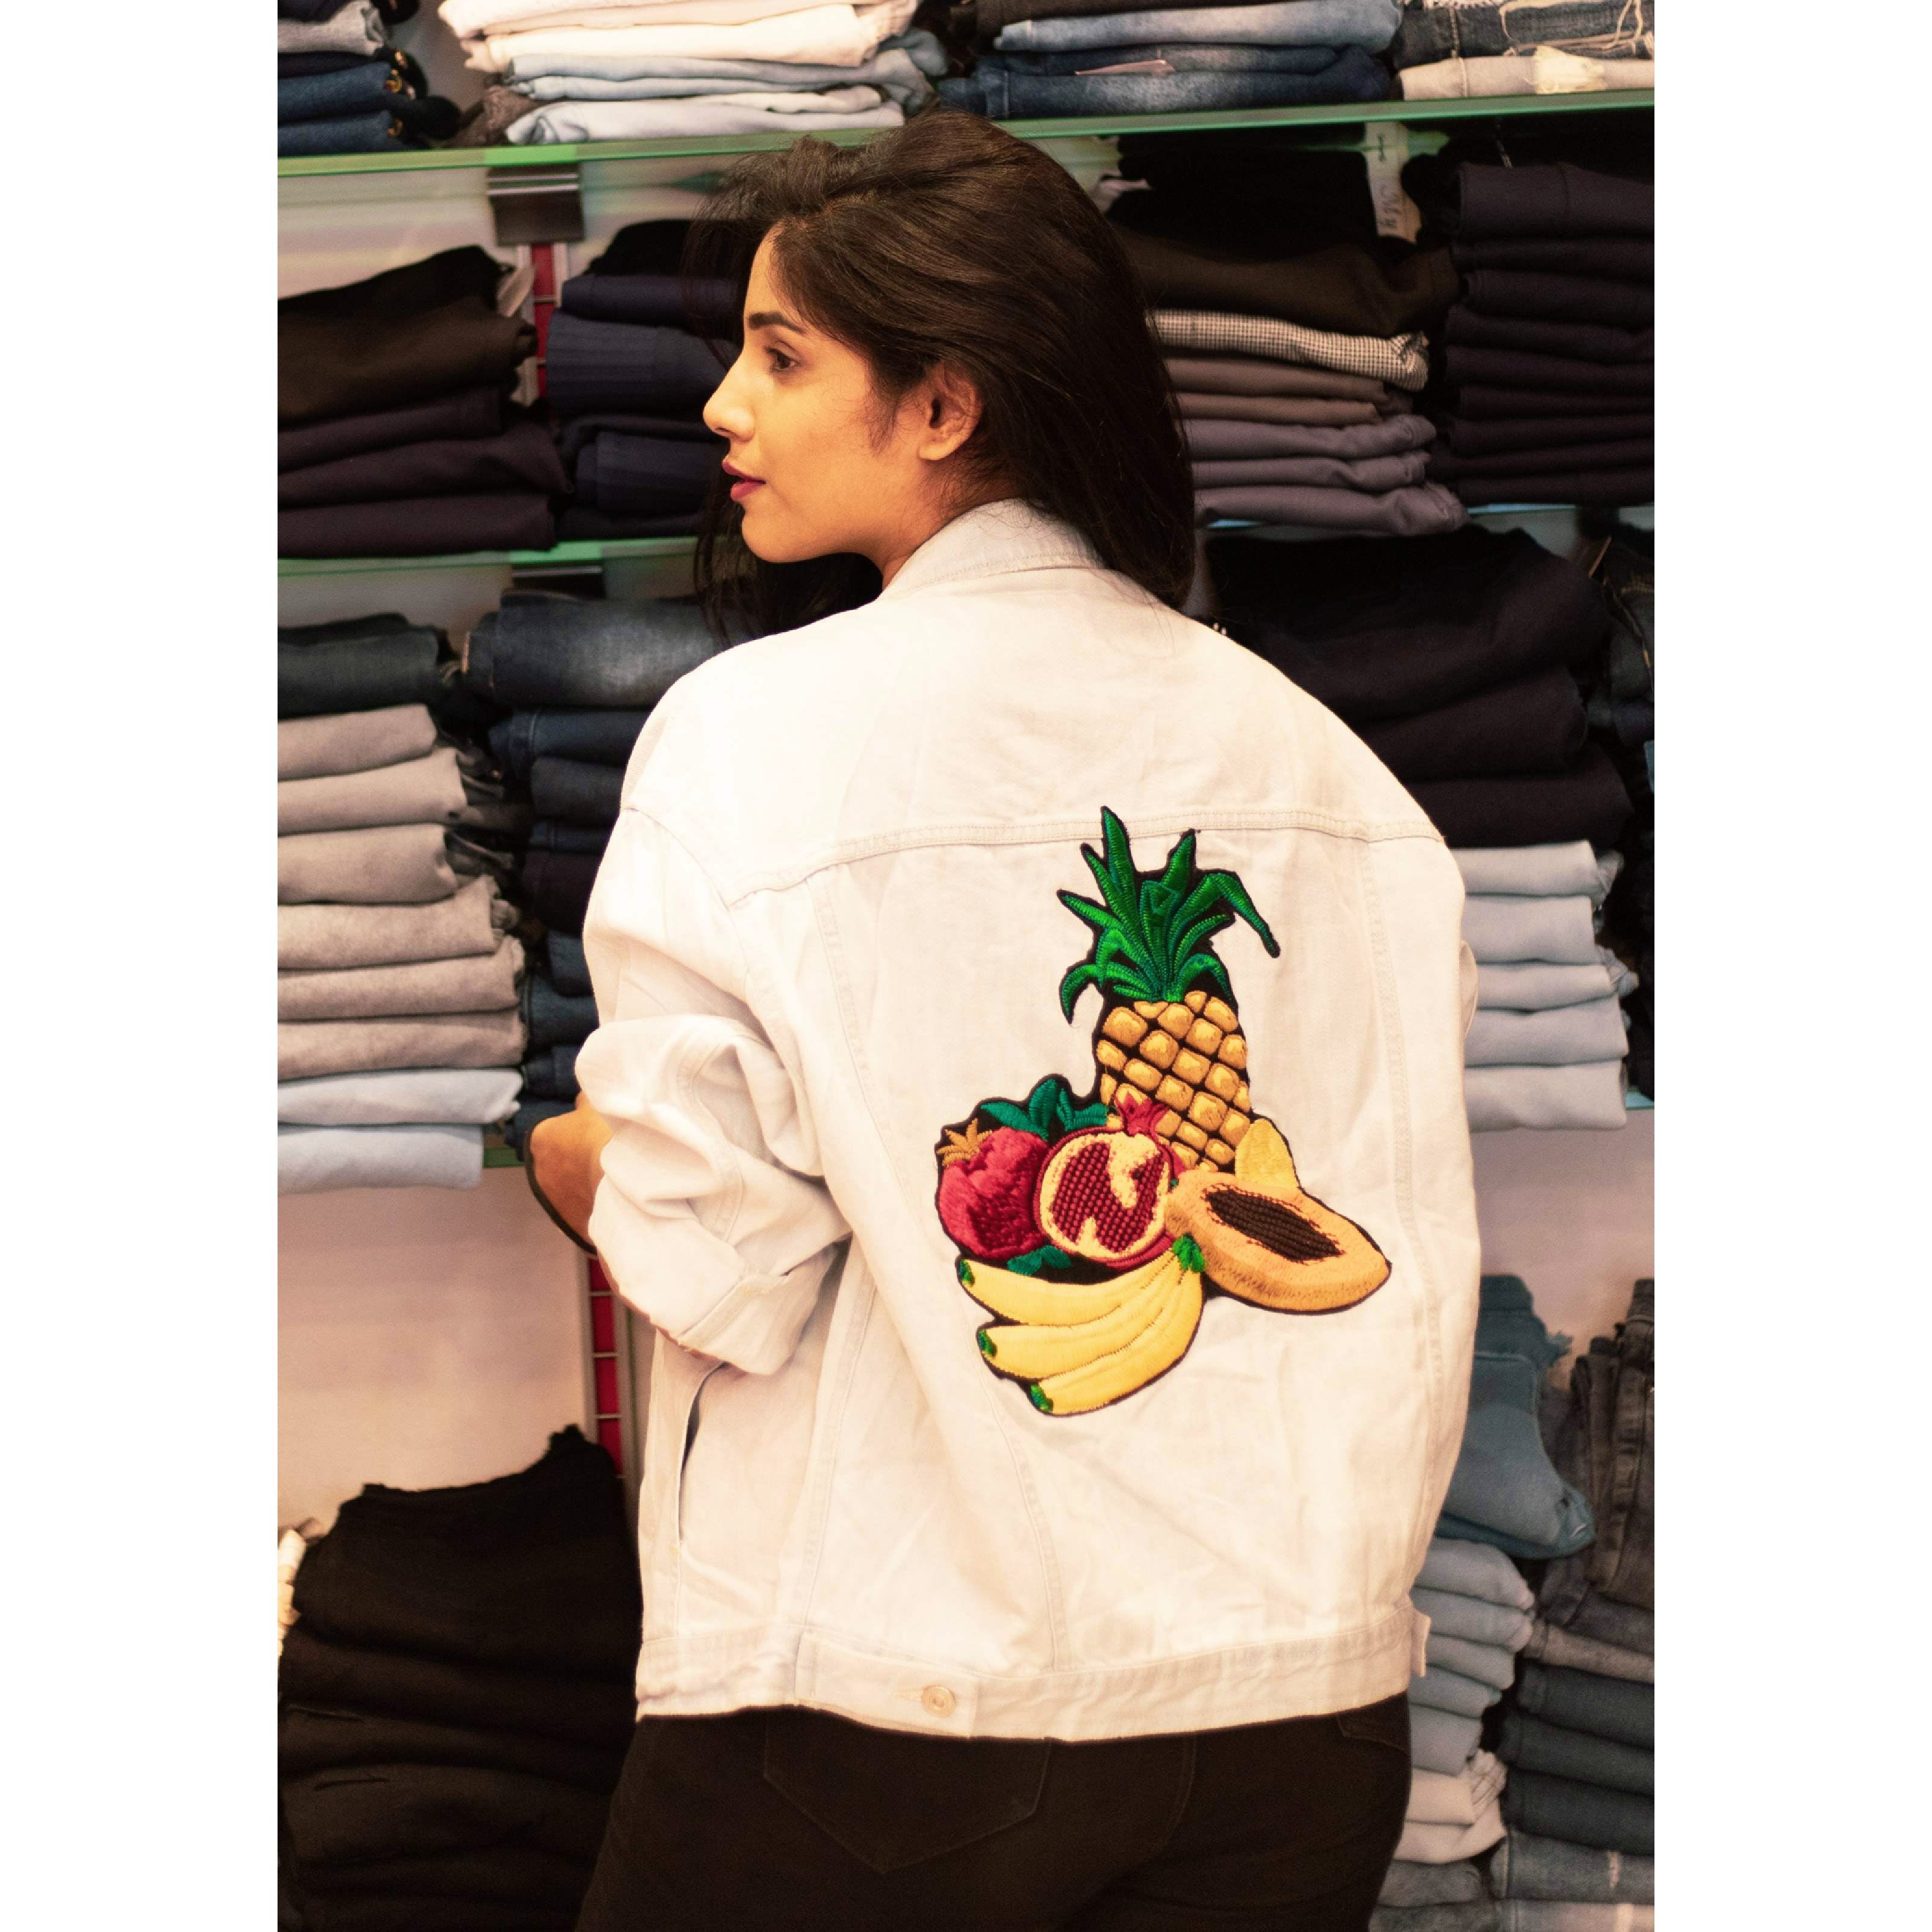 Pineapple,Clothing,Outerwear,Jacket,Sleeve,T-shirt,Arm,Long-sleeved t-shirt,Top,Fruit